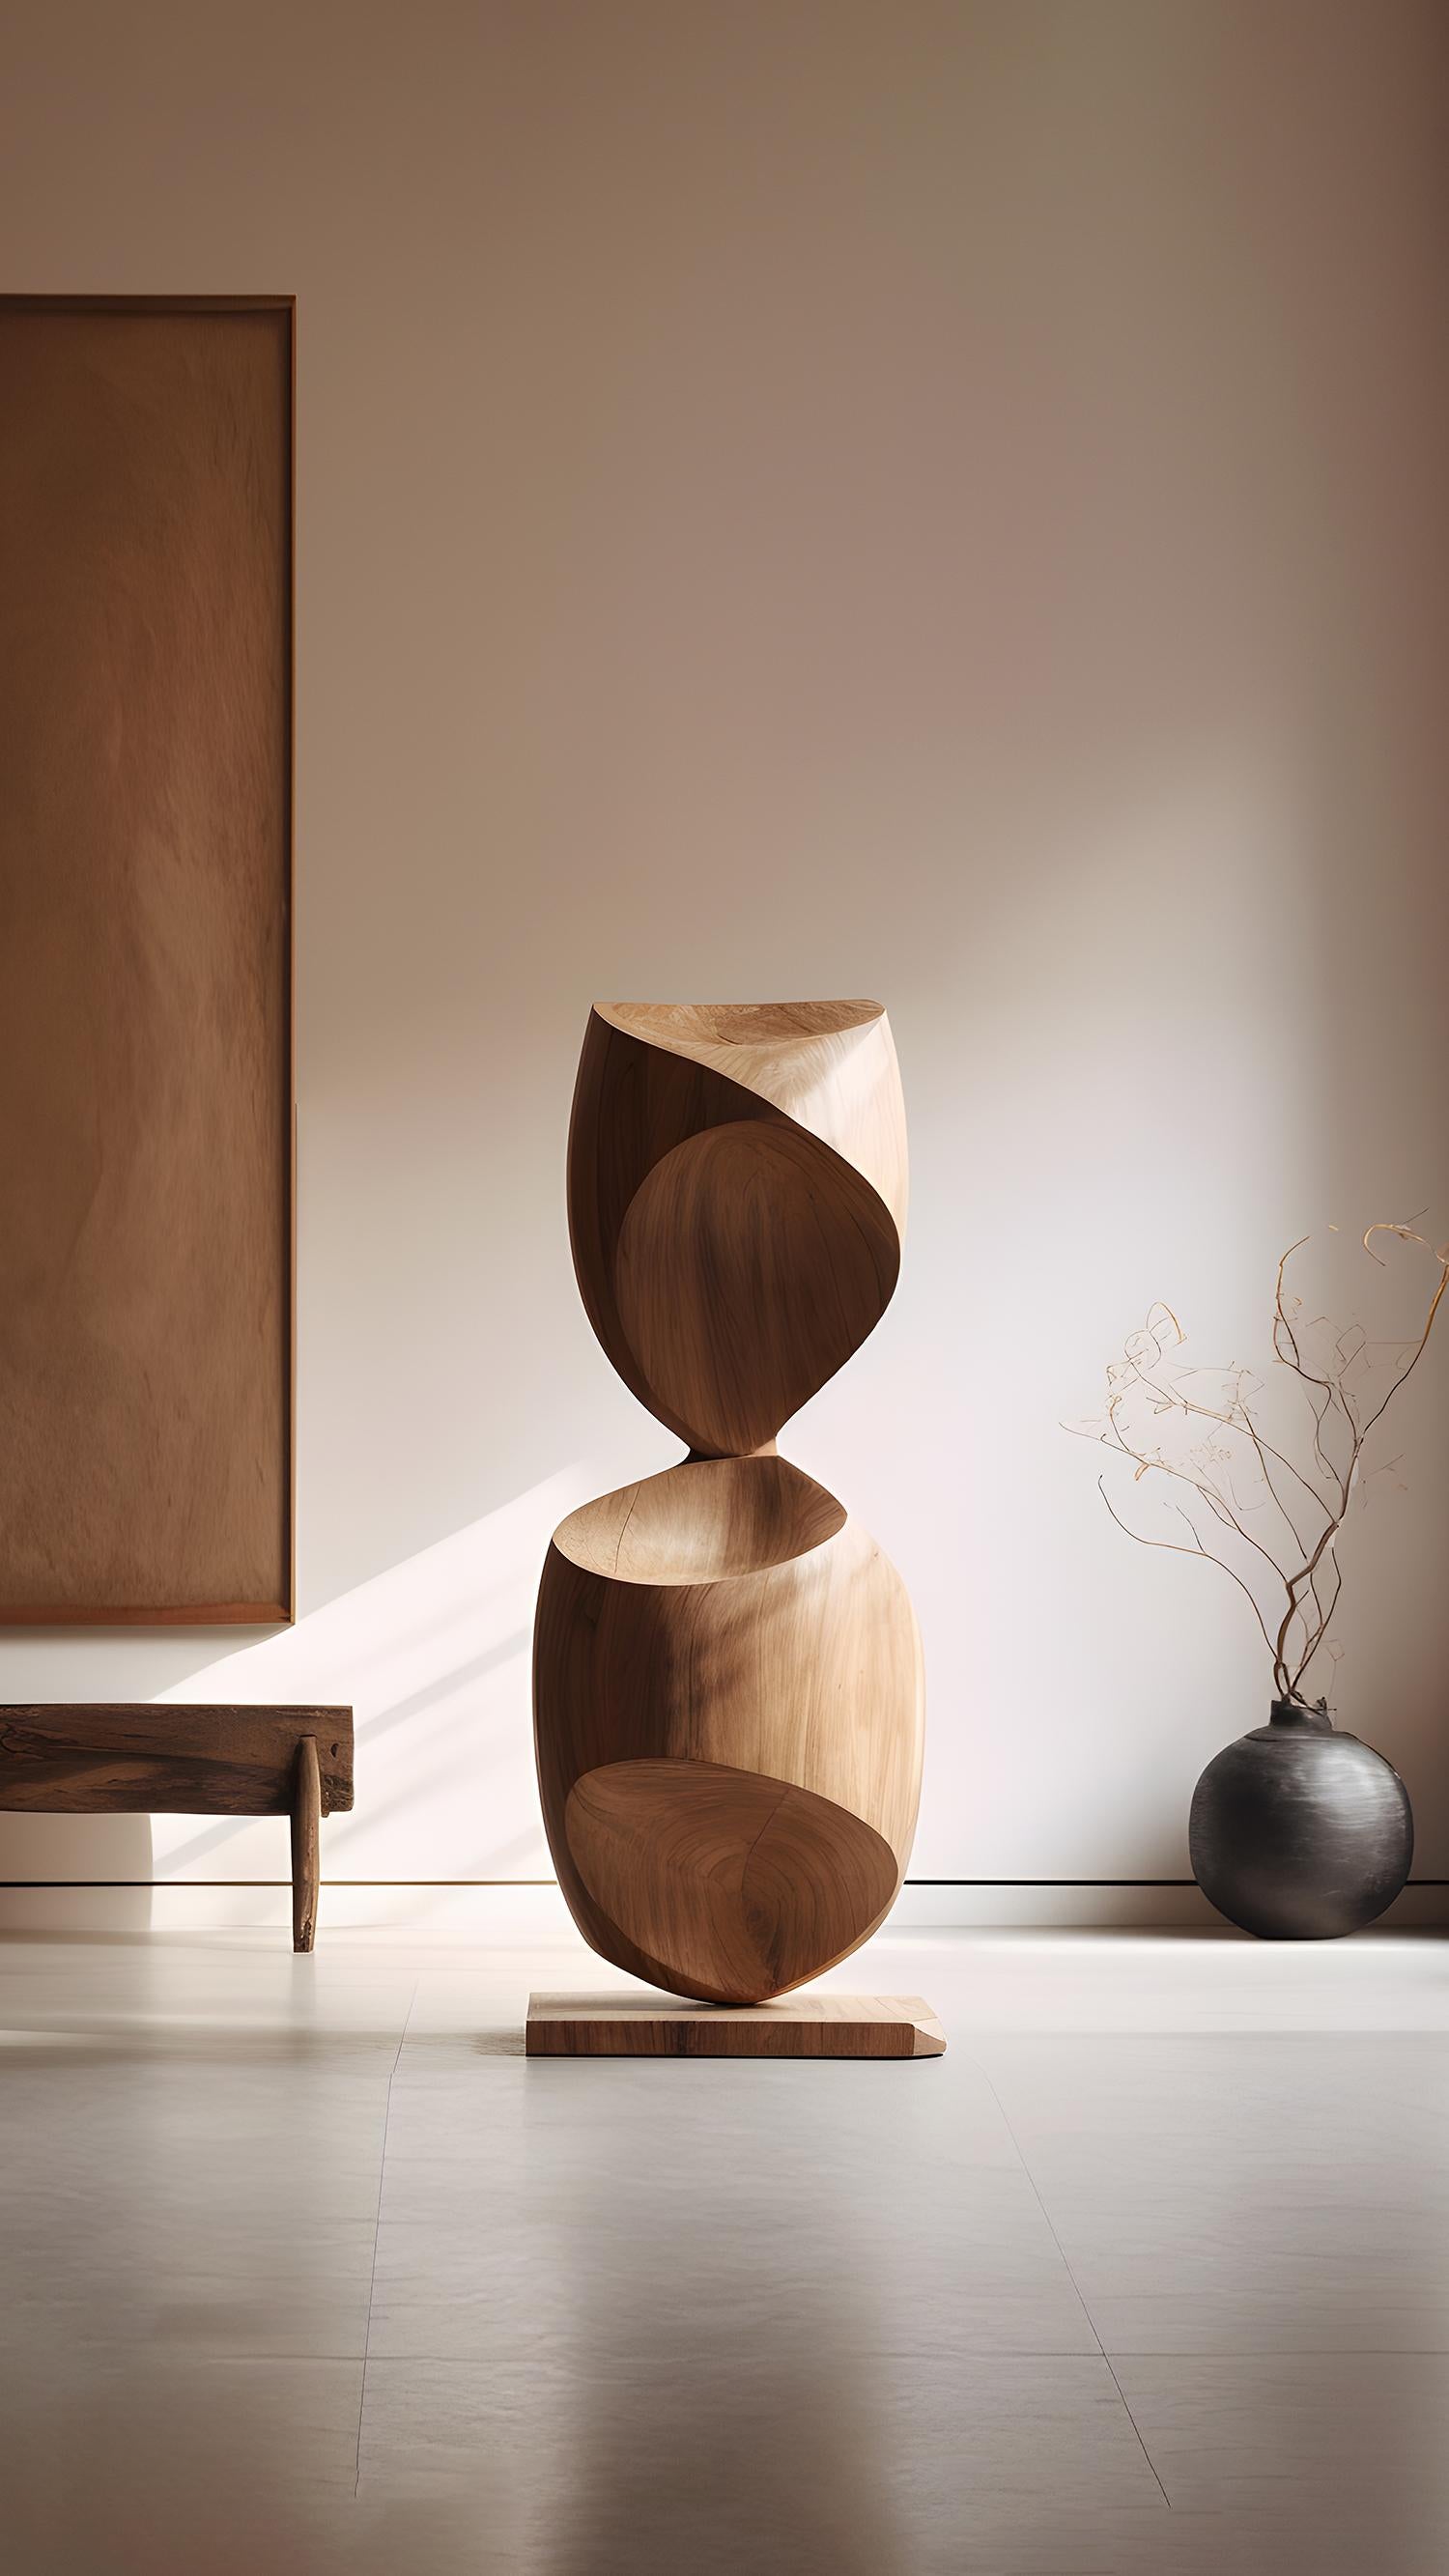 “Still Stand” sculptures by Joel Escalona

Joel Escalona's wooden standing sculptures are objects of raw beauty and serene grace. Each one is a testament to the power of the material, with smooth curves that flow into one another, inviting the